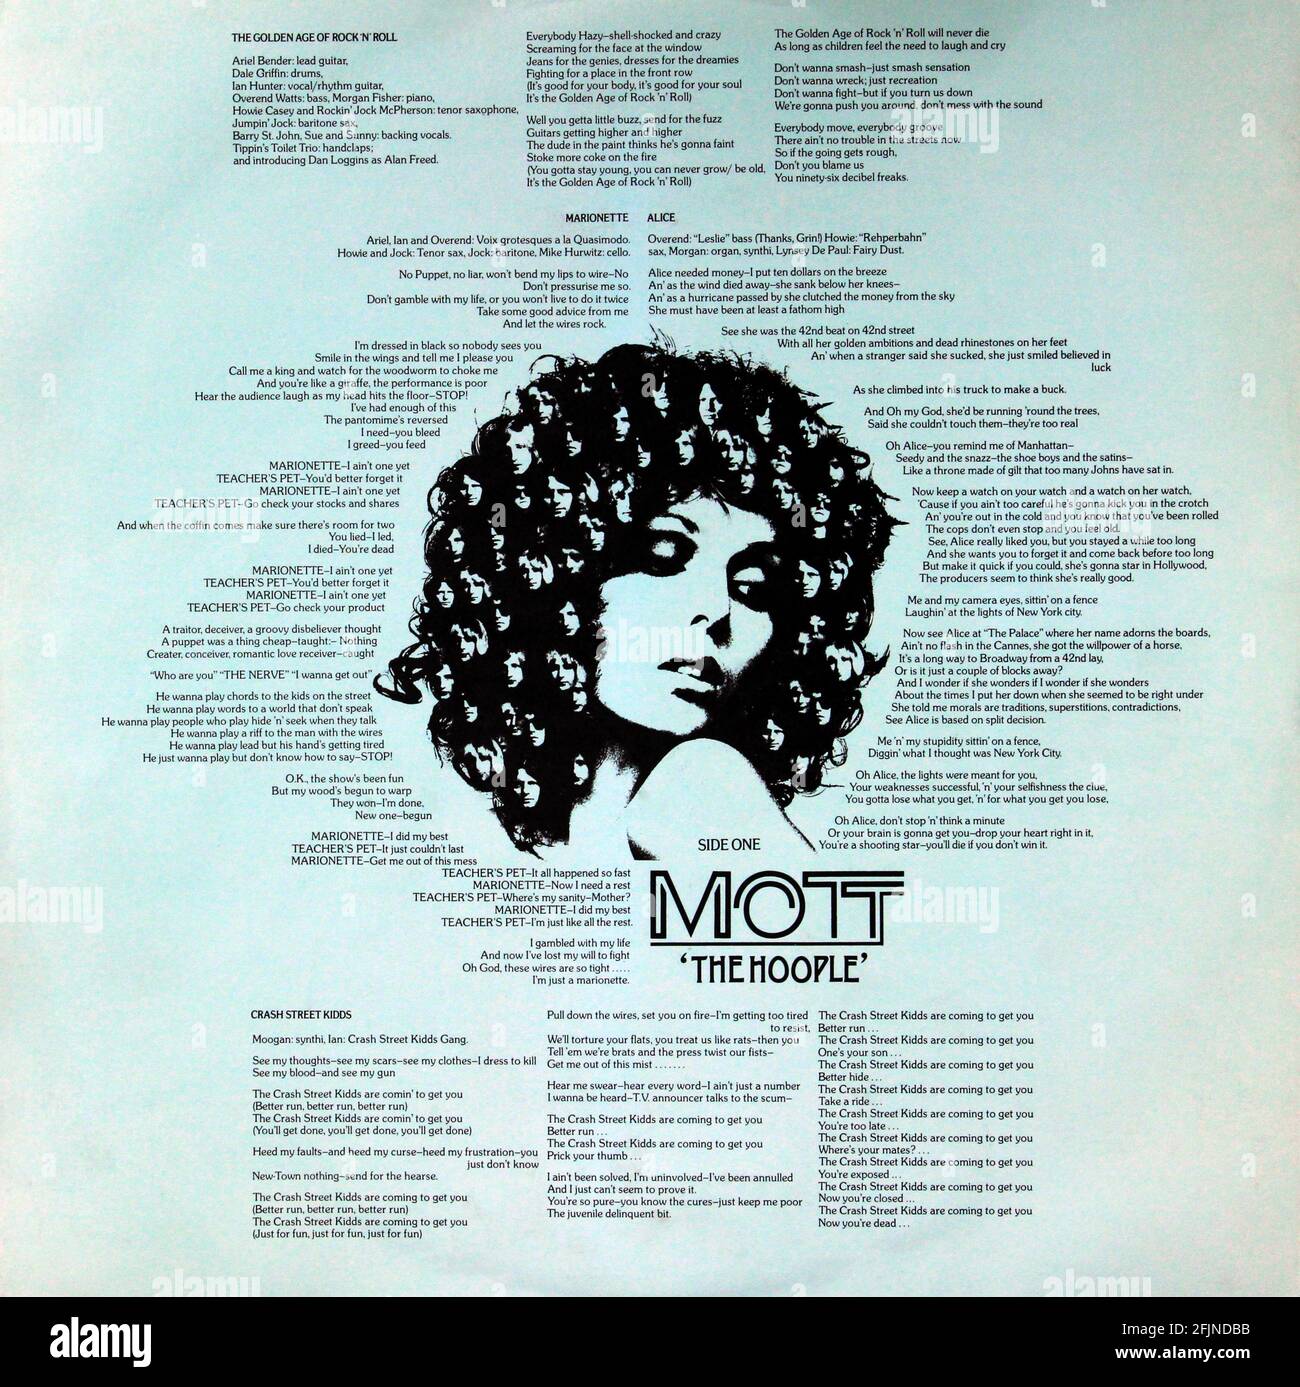 Mott The Hoople: 1974. LP front cover: The Hoople Stock Photo